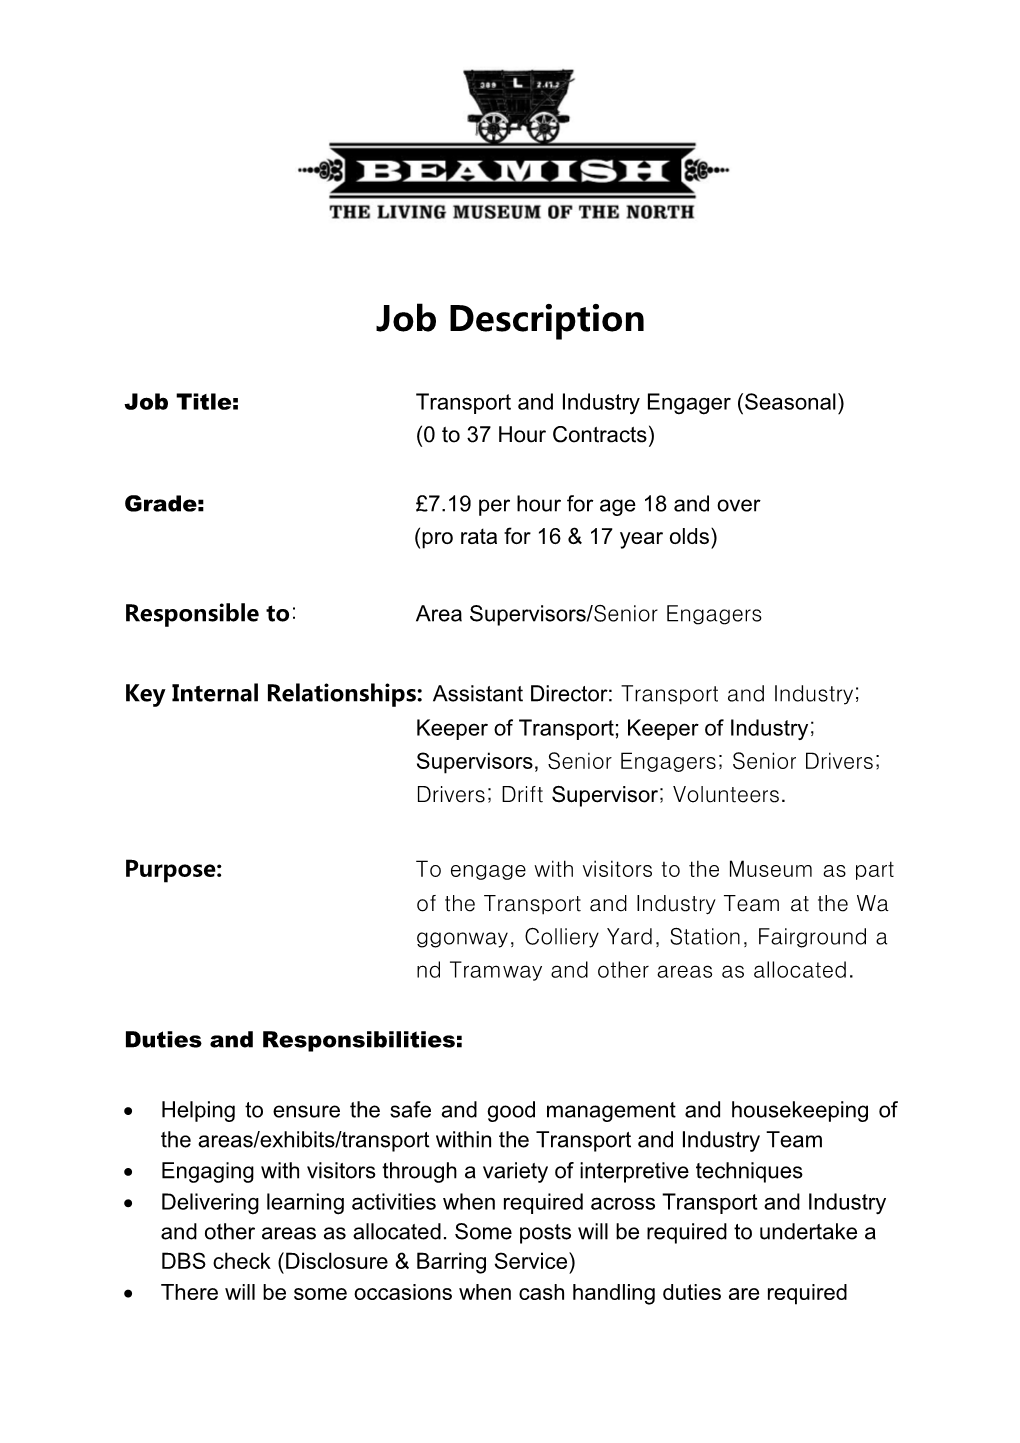 Job Title: Transport and Industry Engager (Seasonal)